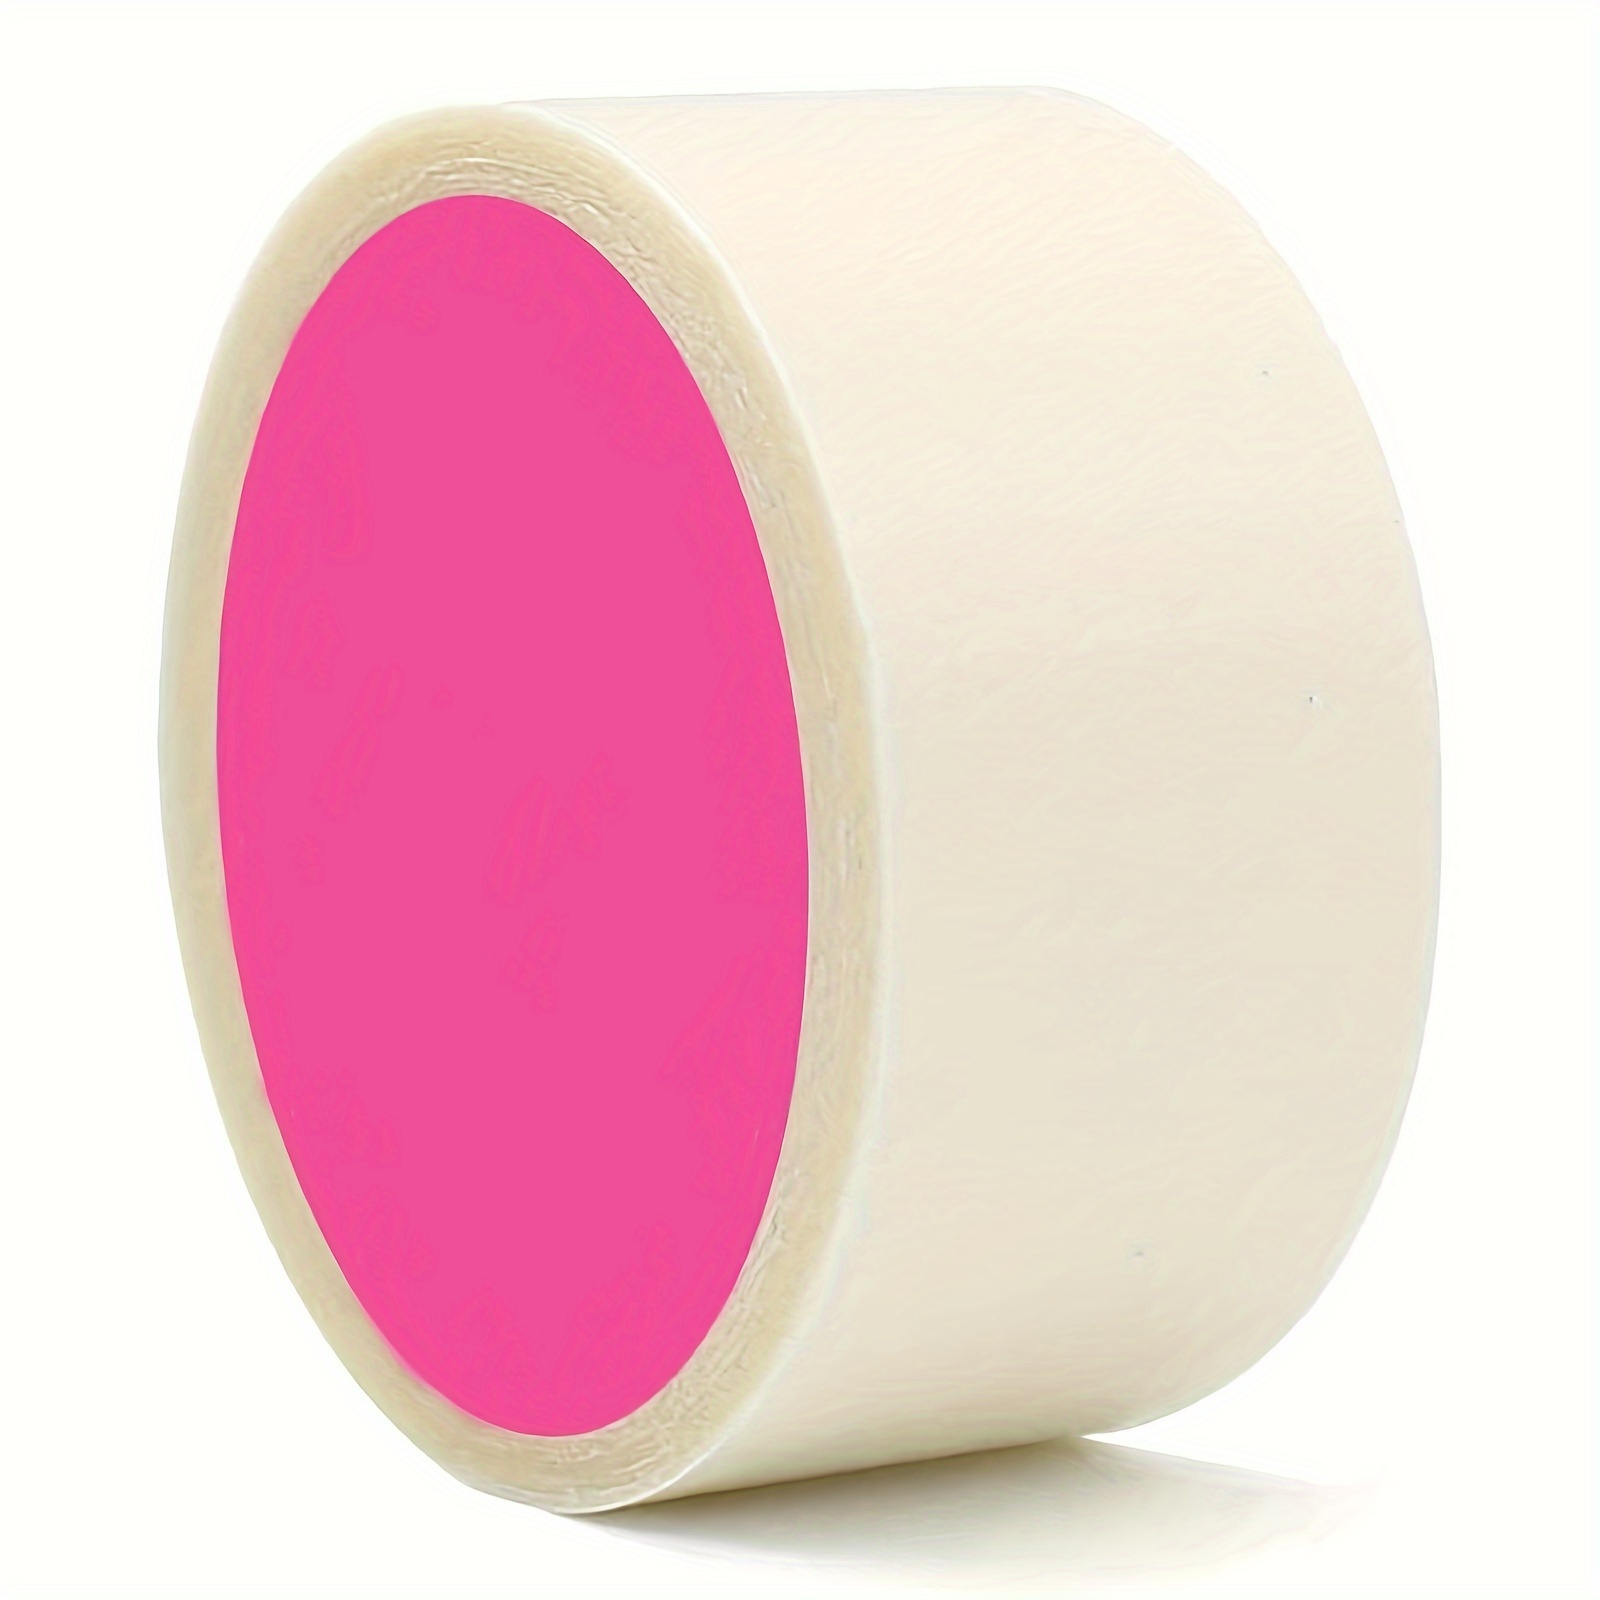 Dress Tape, Double-Sided and Clothes Friendly Adhesive Tape to Keep